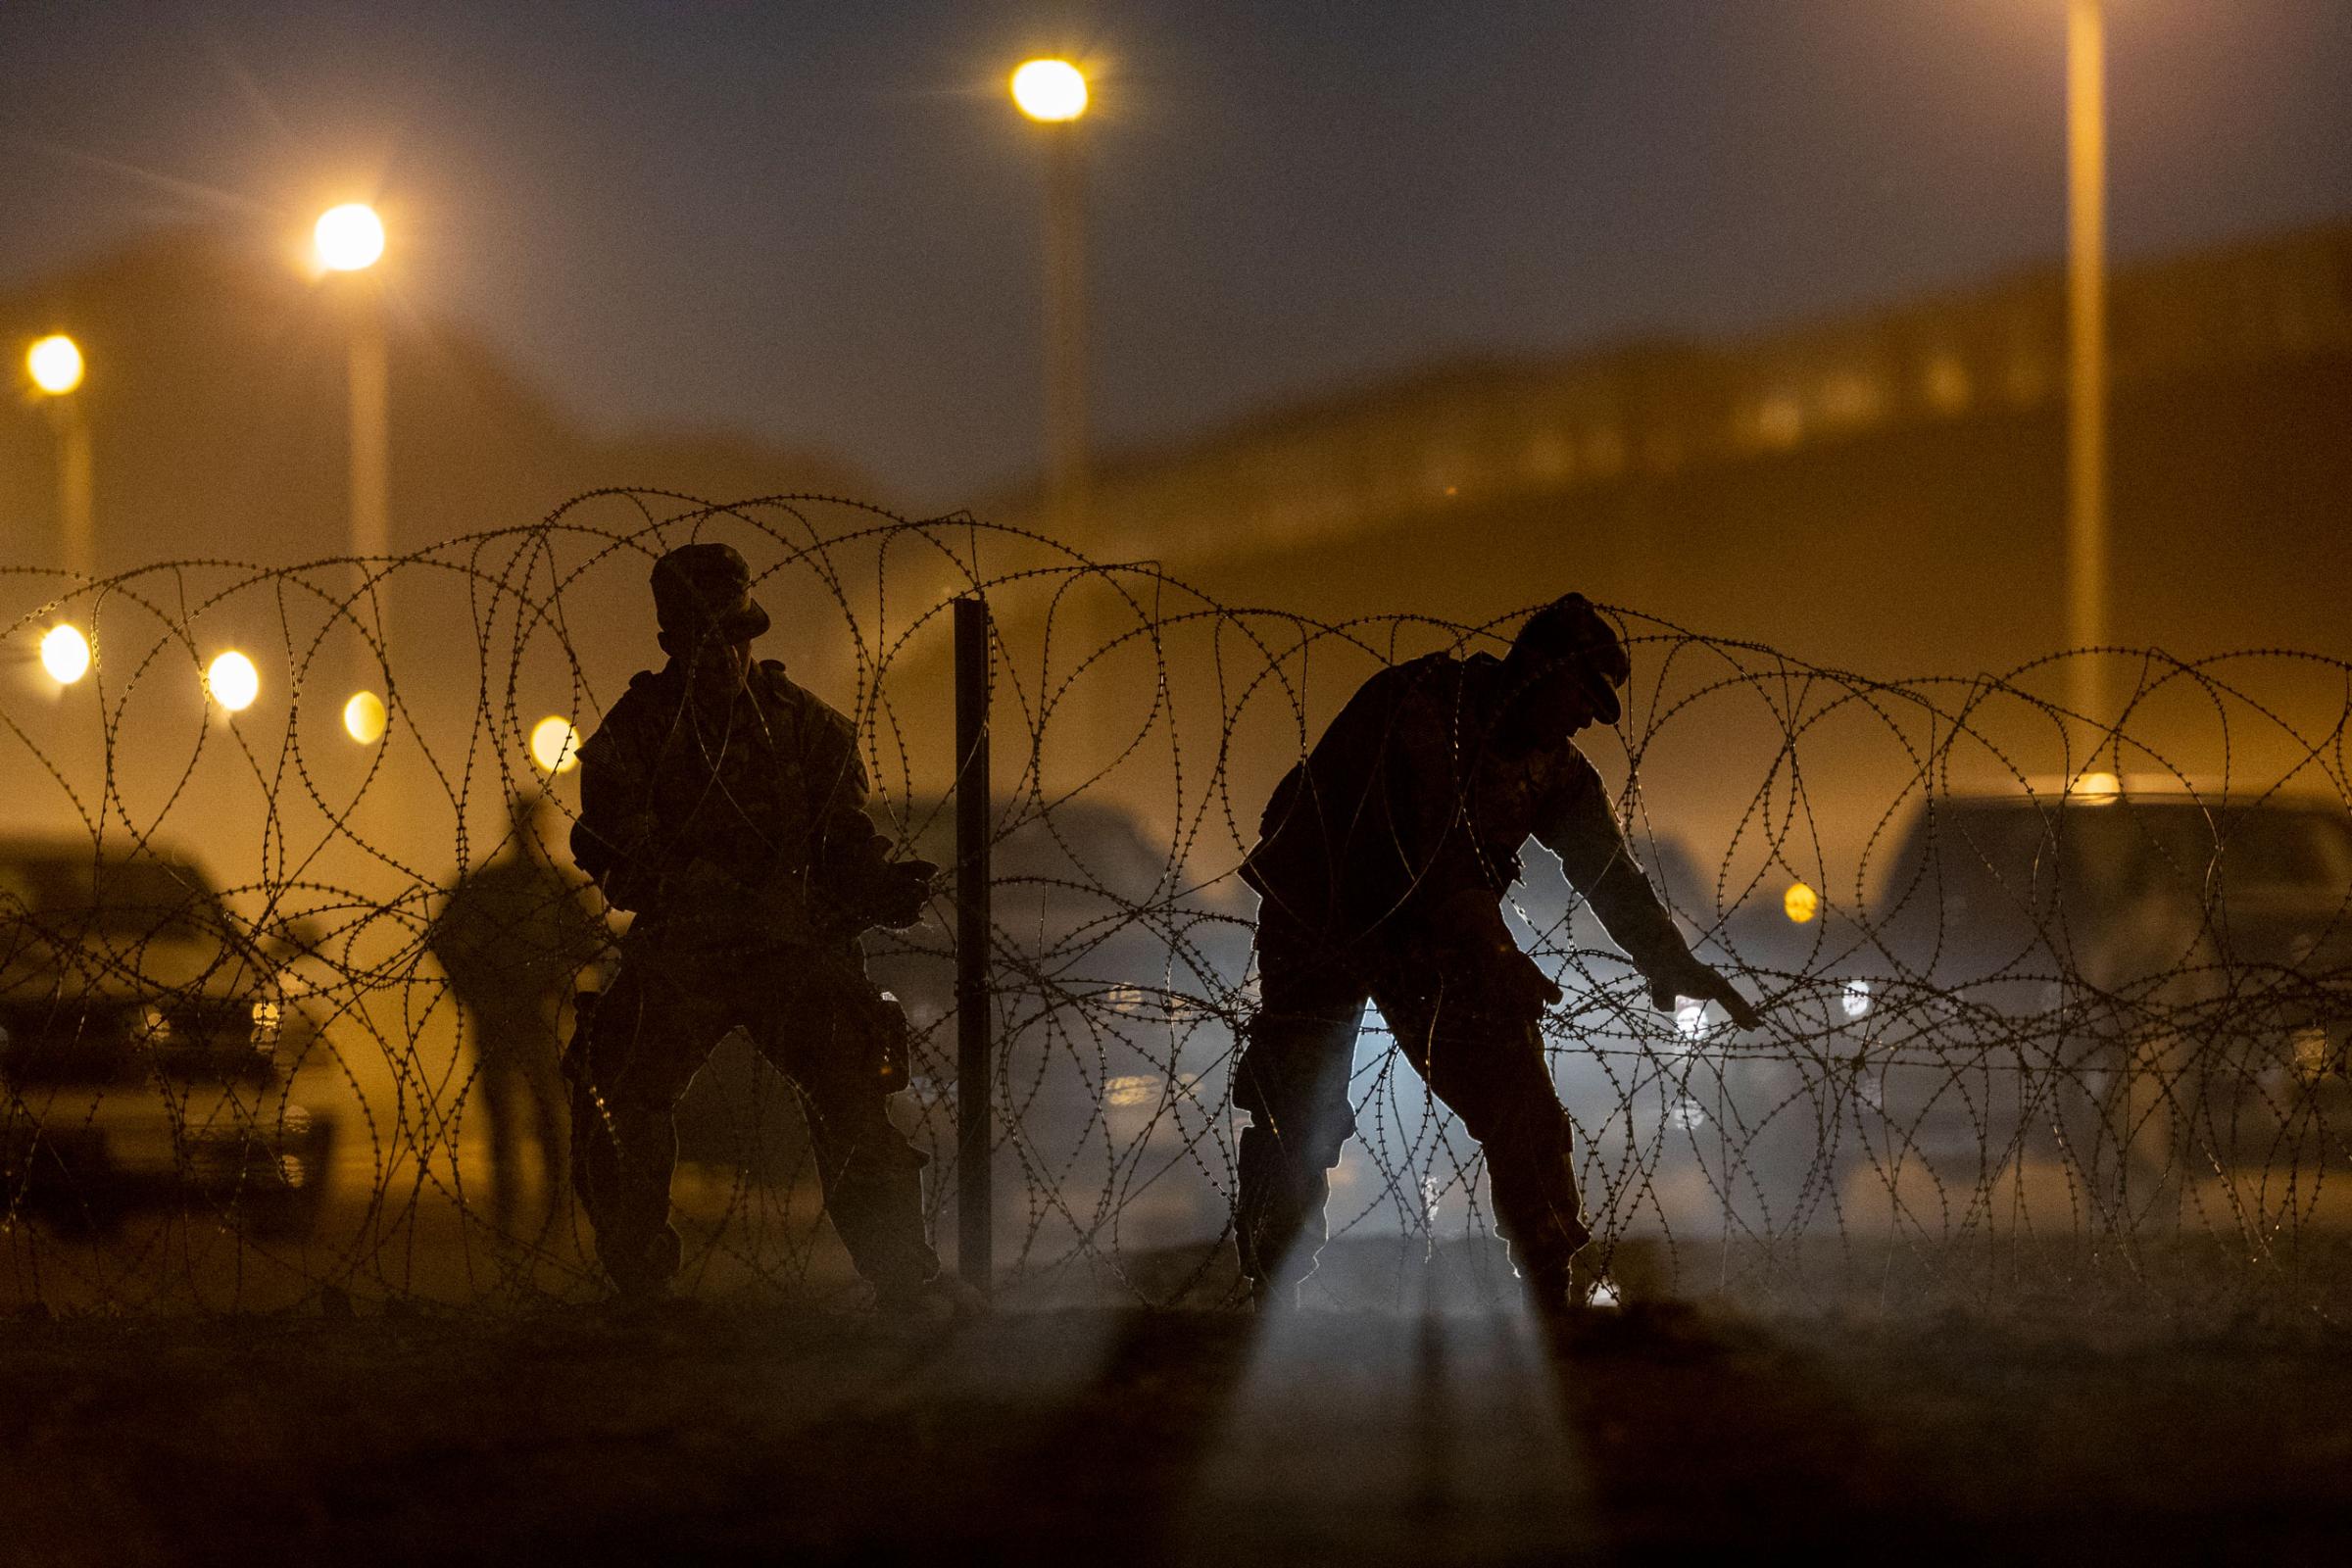 Texas National Guard troops set up razor wire near hundreds of immigrants who had crossed into the United States from Mexico